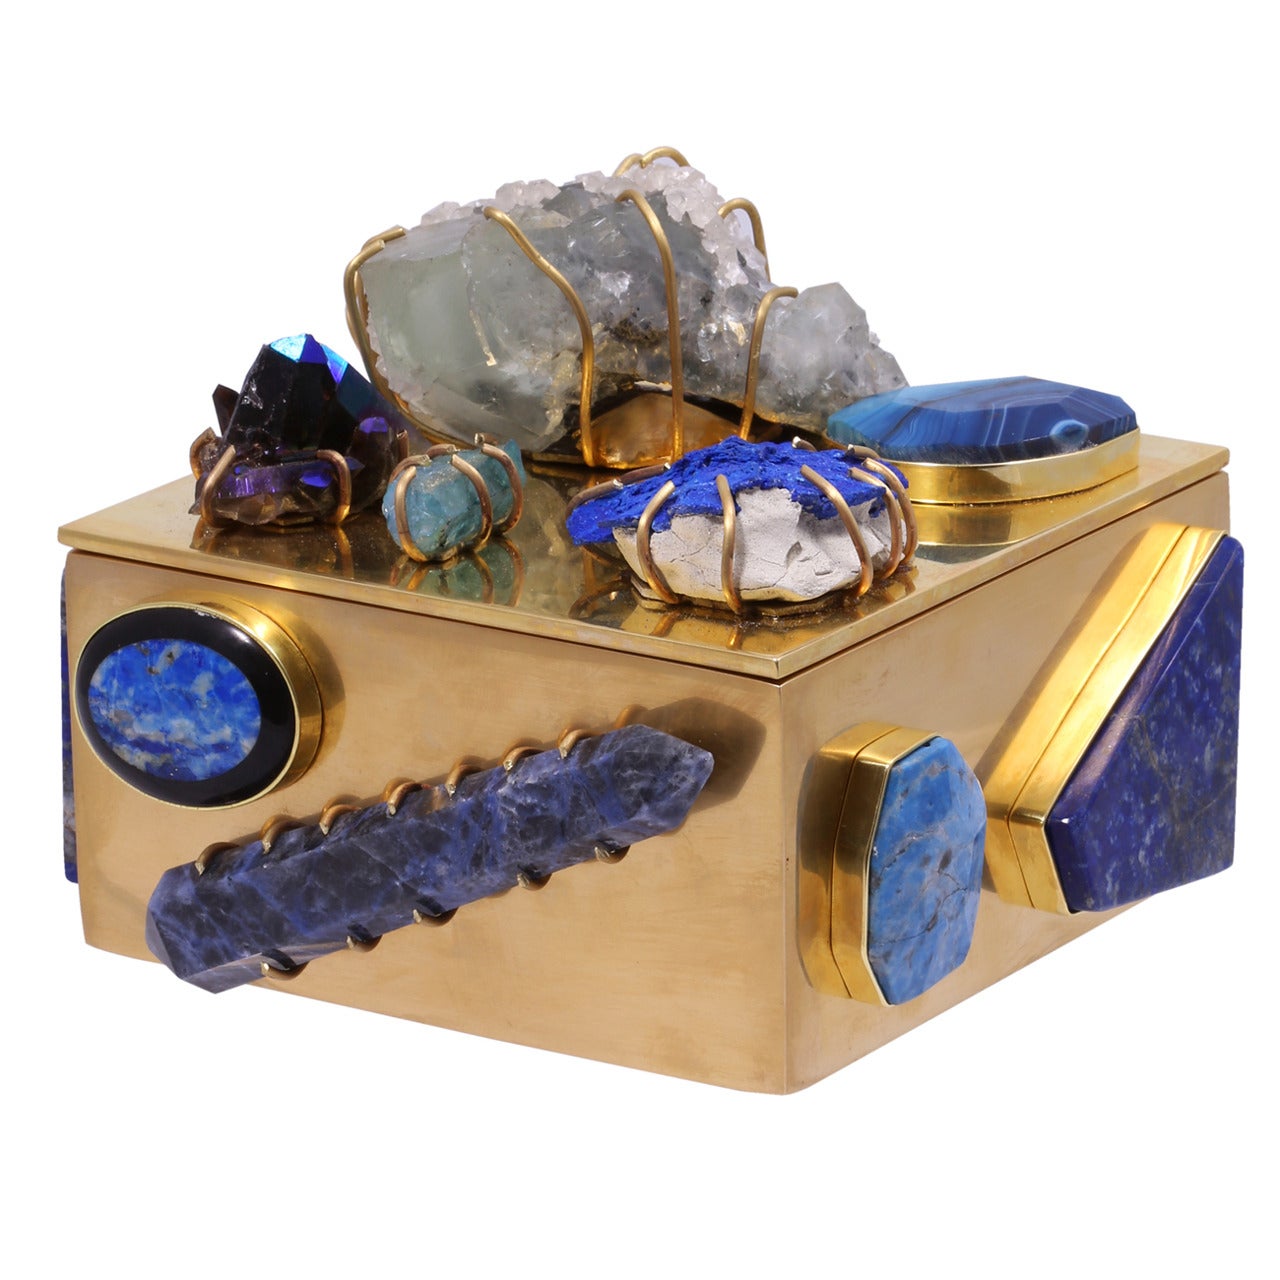 Lapis Lazuli and Azurite Bauble Box by Kelly Wearstler